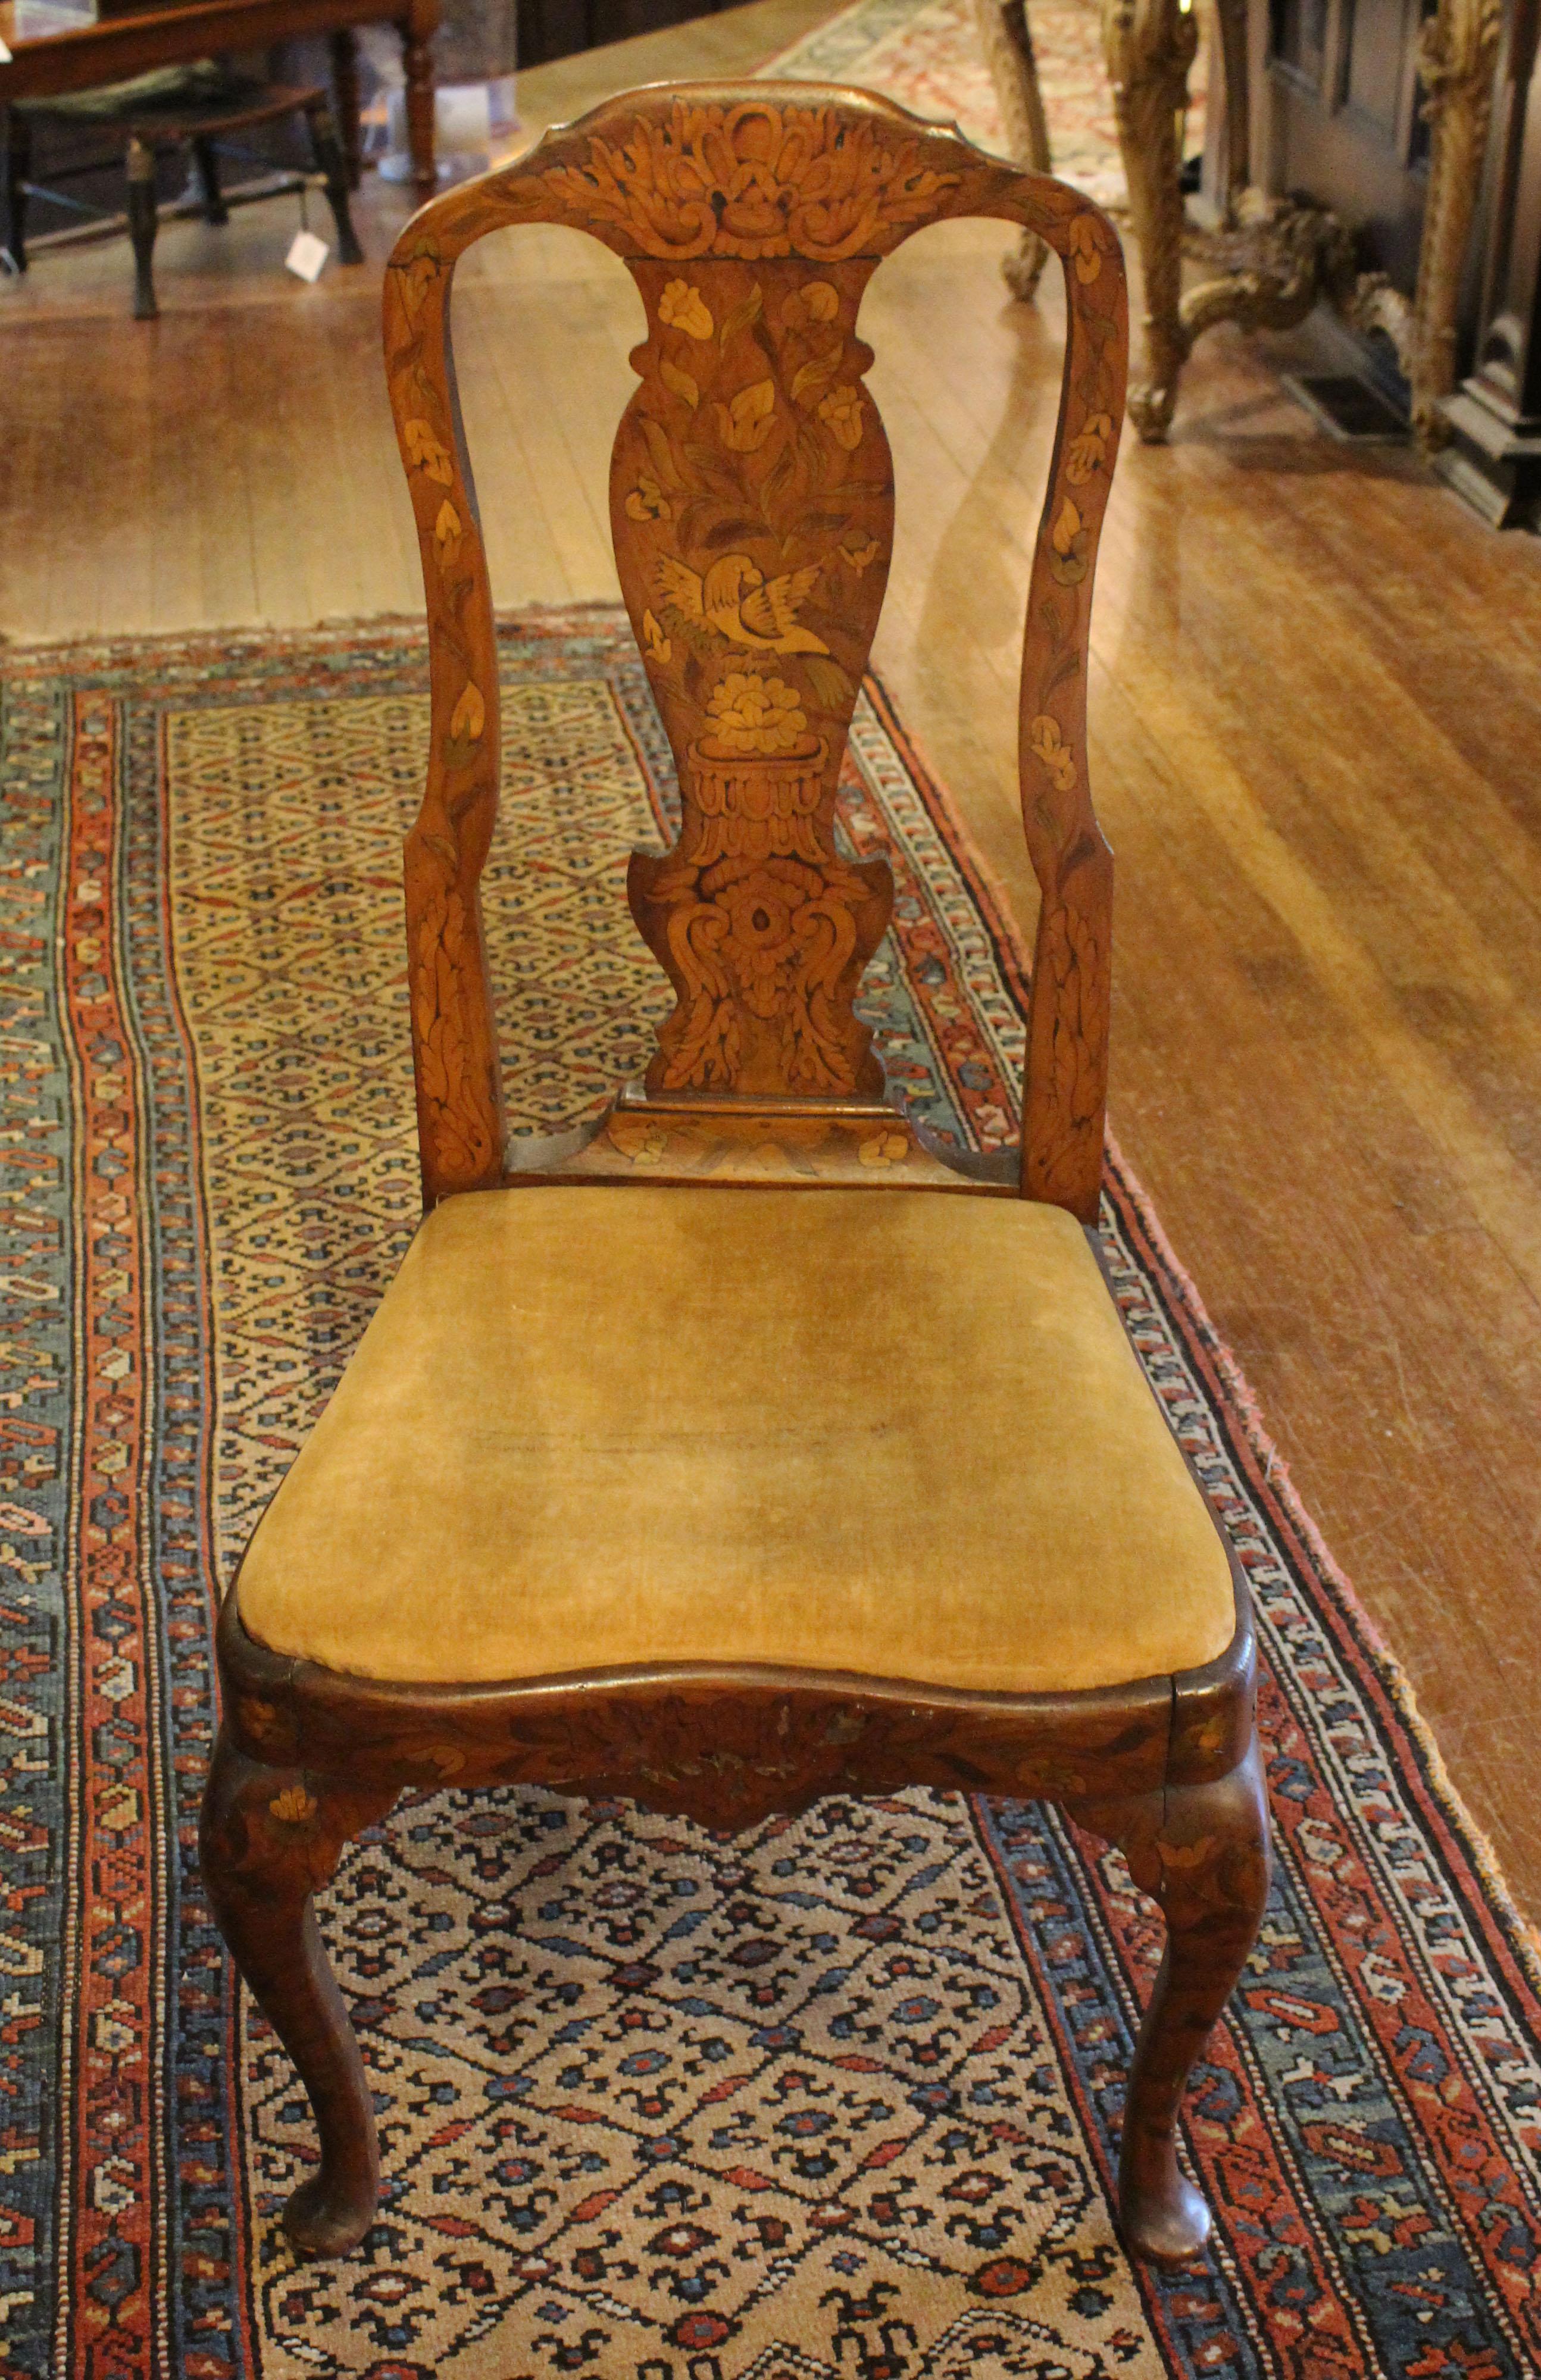 Mid-19th century marquetry inlaid side chair, Dutch. Walnut & oak with extensive marquetry of birds & flowers in the mid-18th century taste. Typical small marquetry losses. Provenance: Katharine Reid former director of the Cleveland Museum of Art.